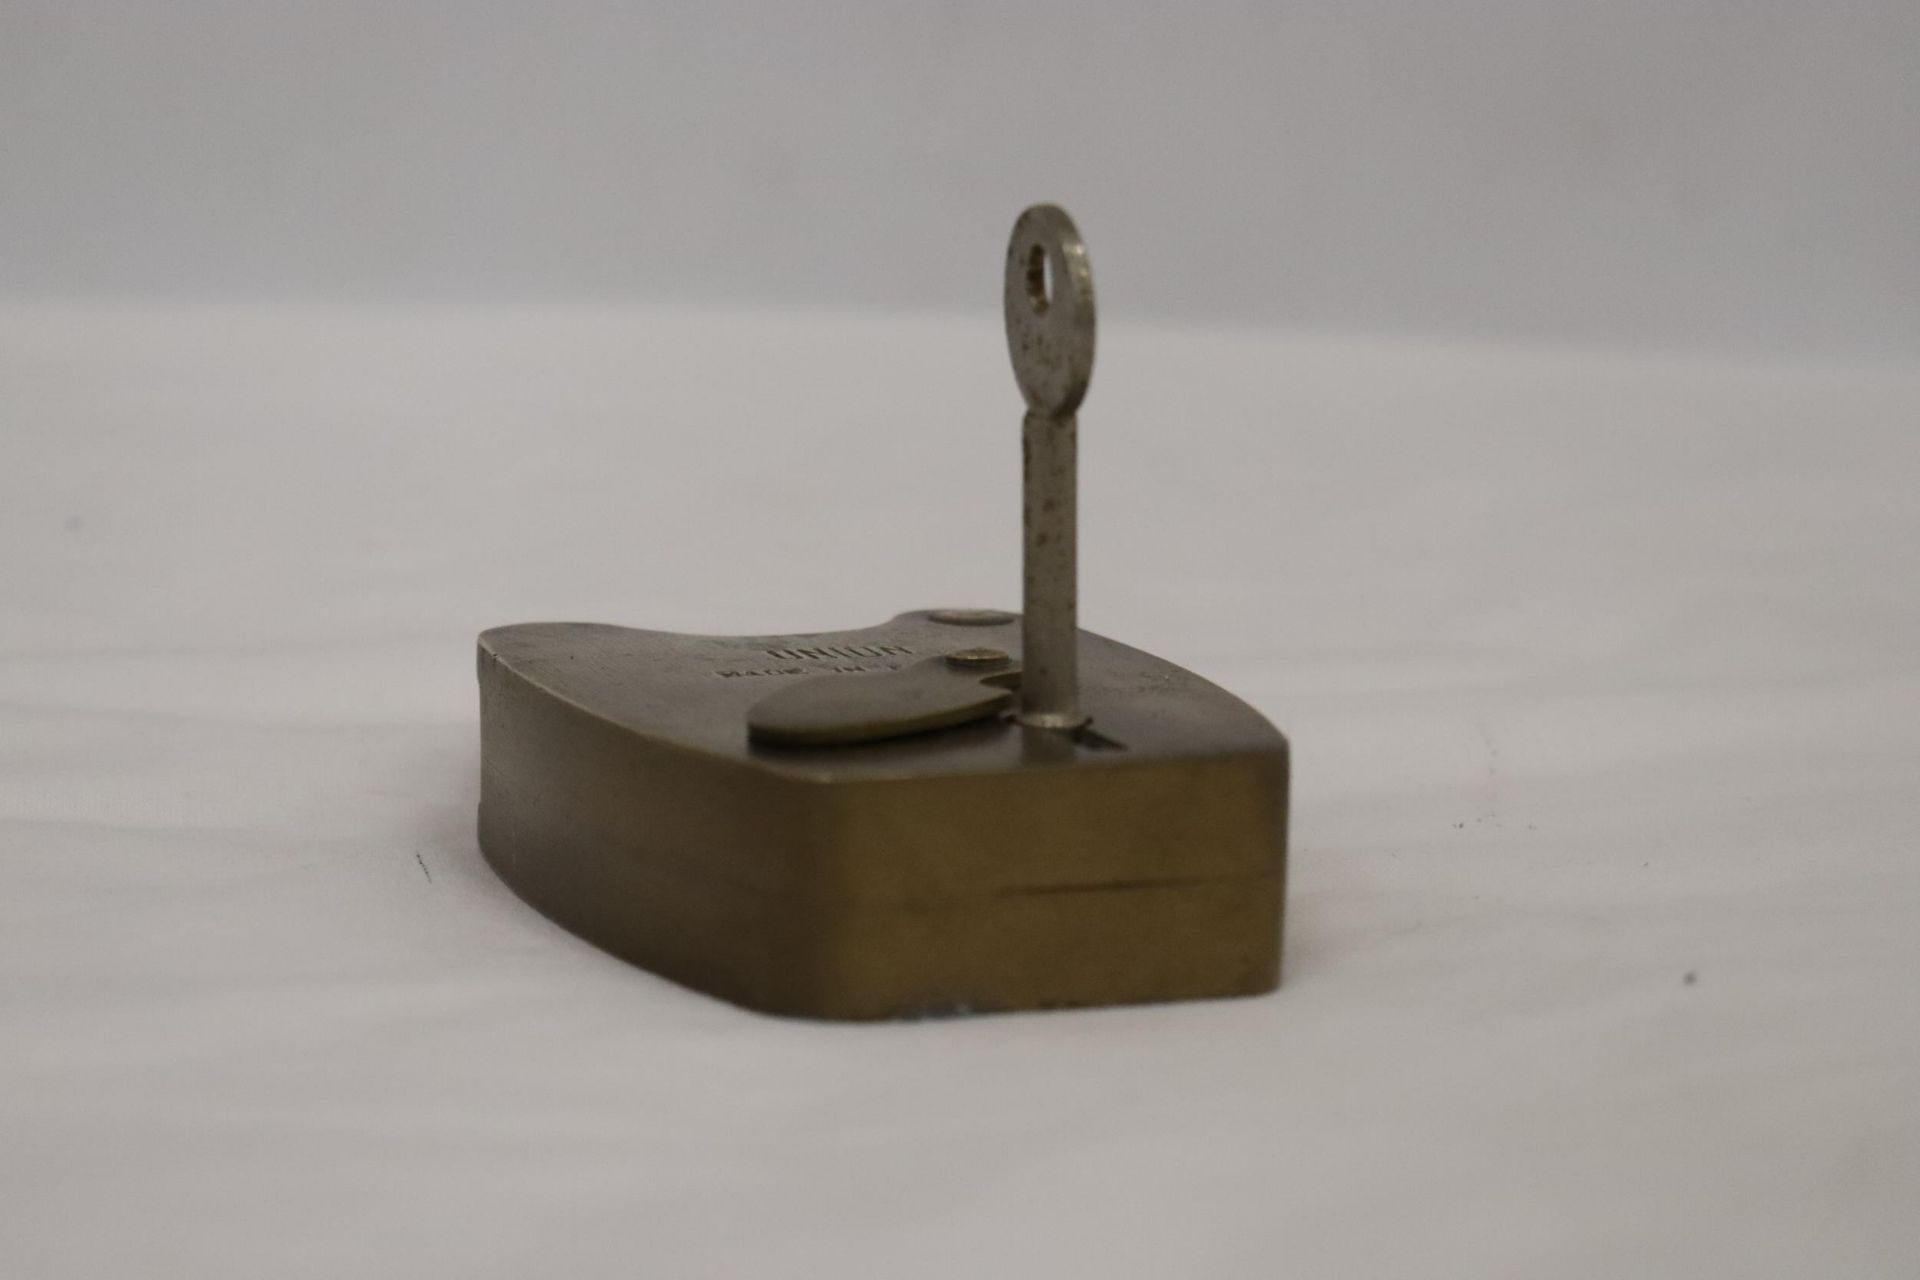 A VINTAGE BRASS UNION PADDLOCK AND KEY - 5 INCH TALL - Image 2 of 5